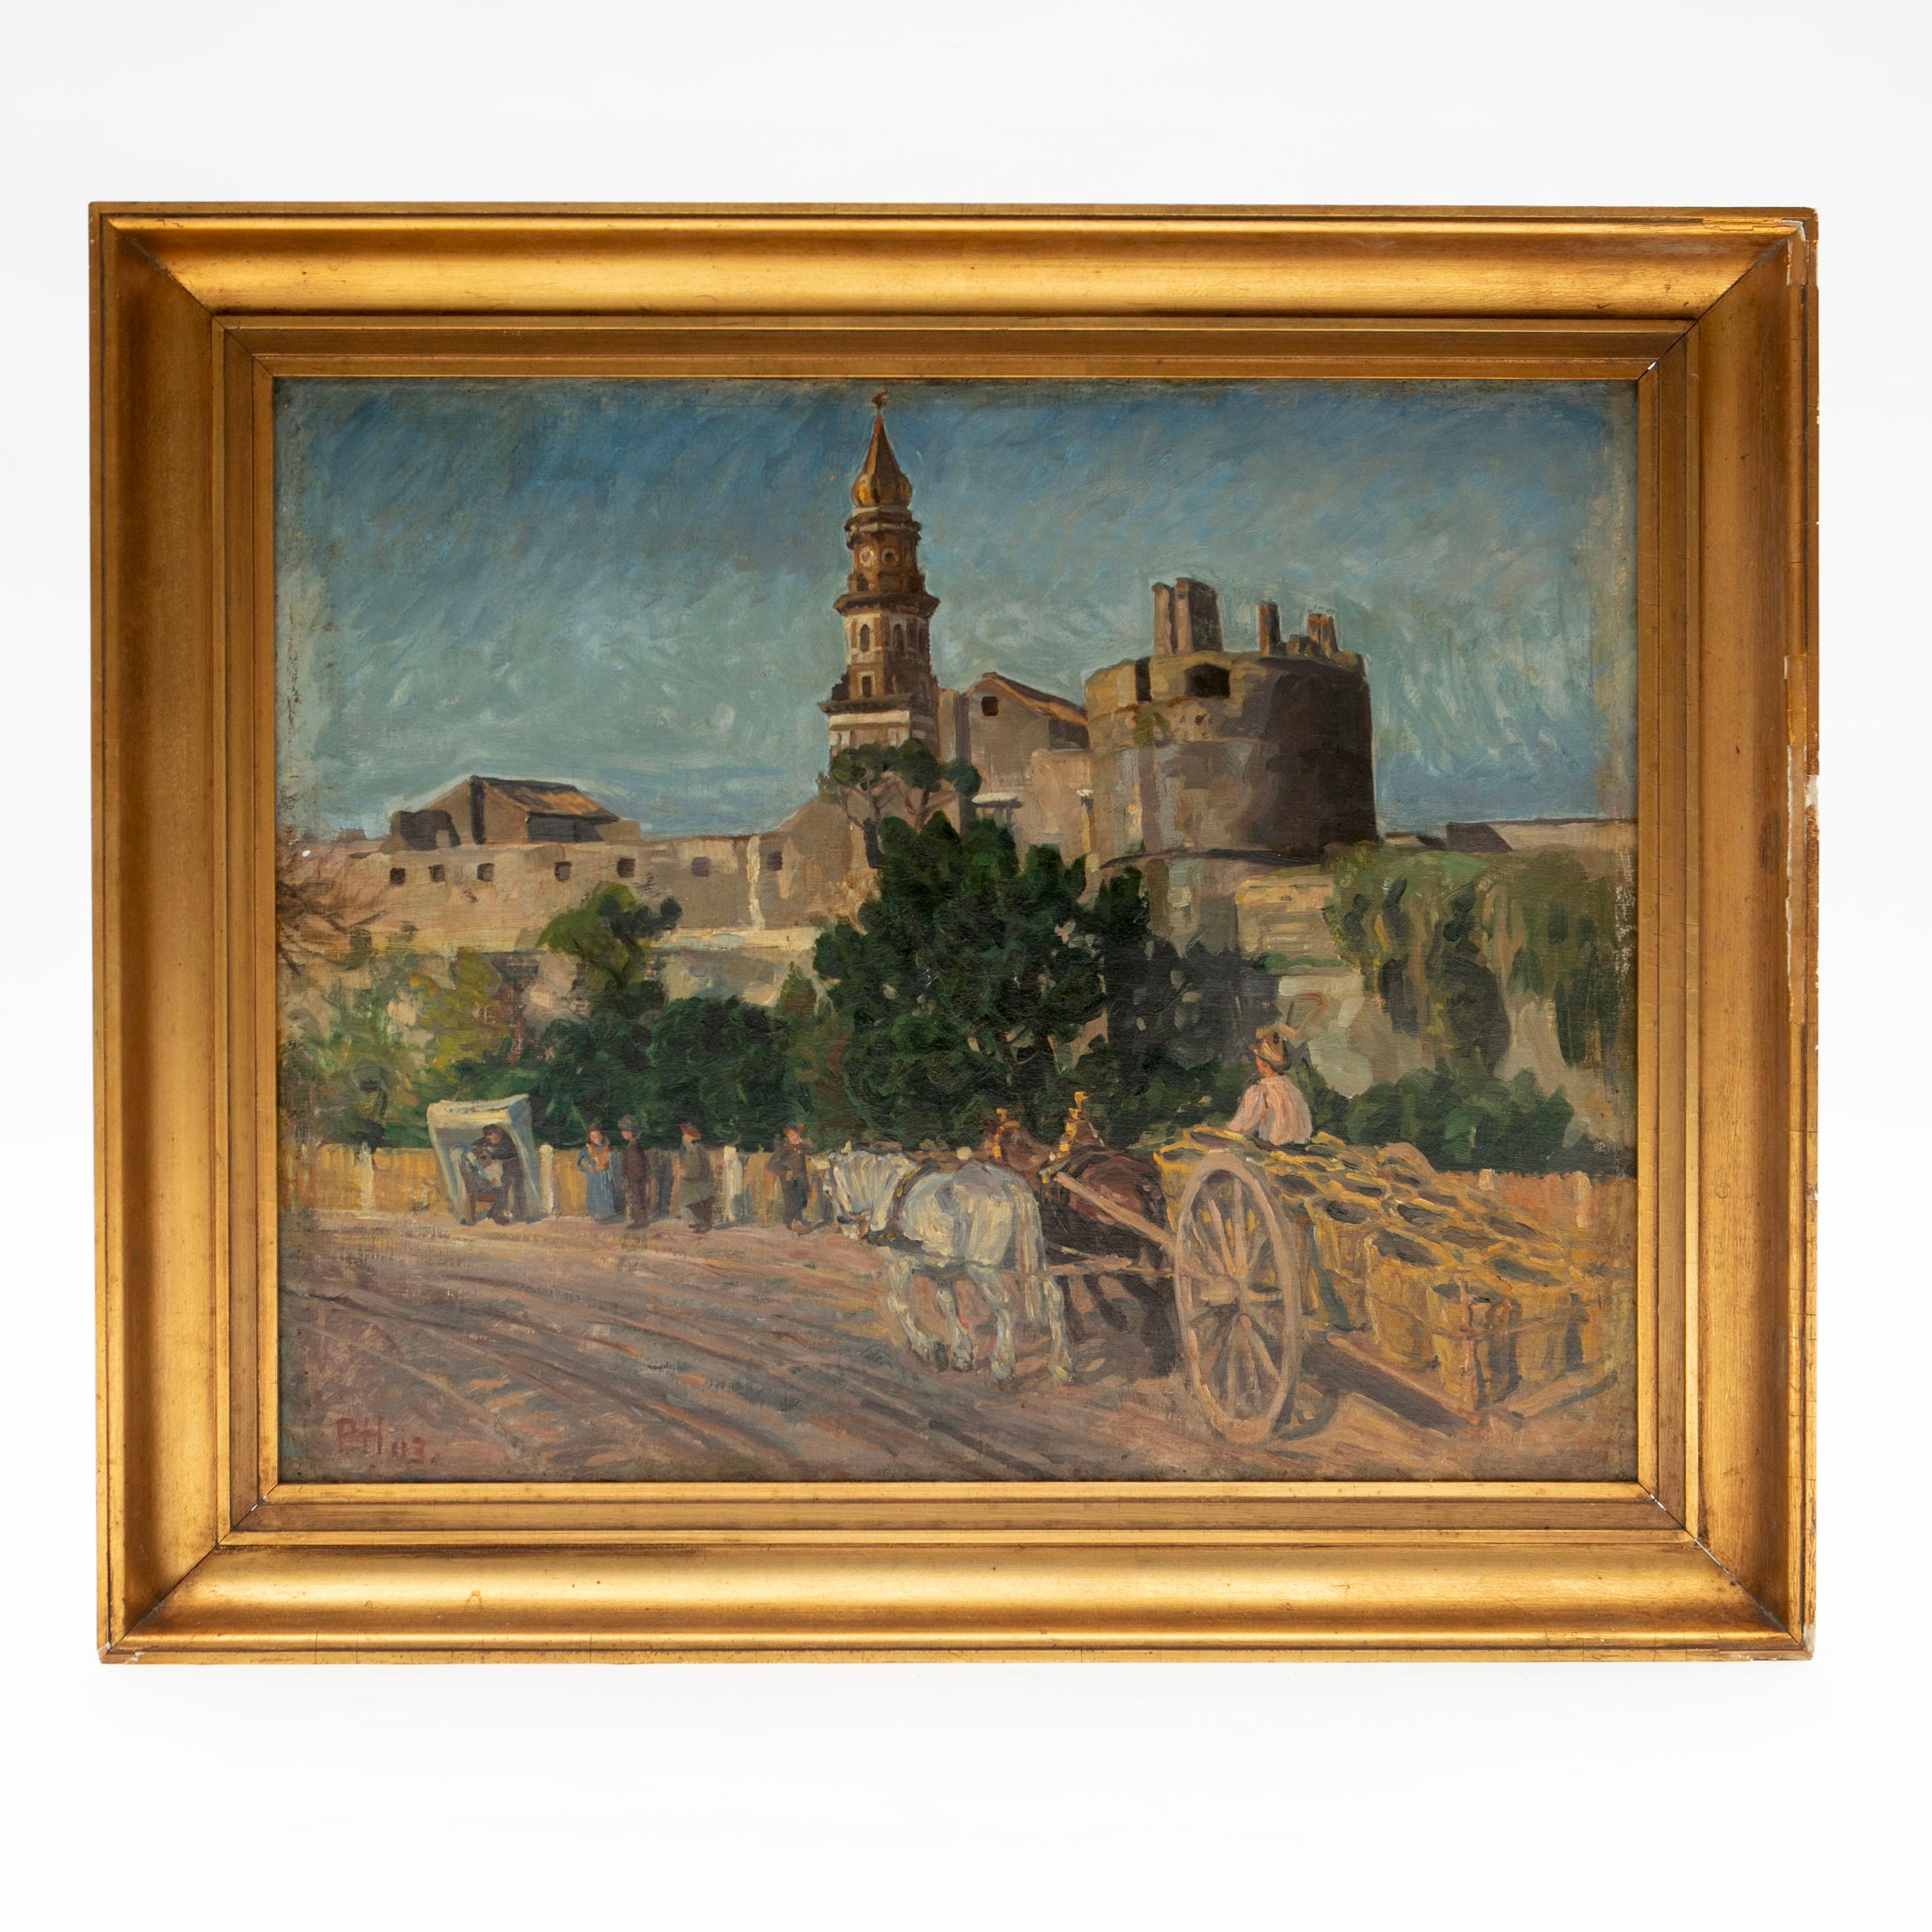 Peter Hansen, Danish 1868-1928

Painting depicting street life on the outskirts of a city in Italy, 1903.
Oil on canvas. Canvas dimensions: 53 x 65 cm. Framed in gilded wooden frame.

Signed PH 03
Measures inkl. frame : H 68 W 79 D 5½